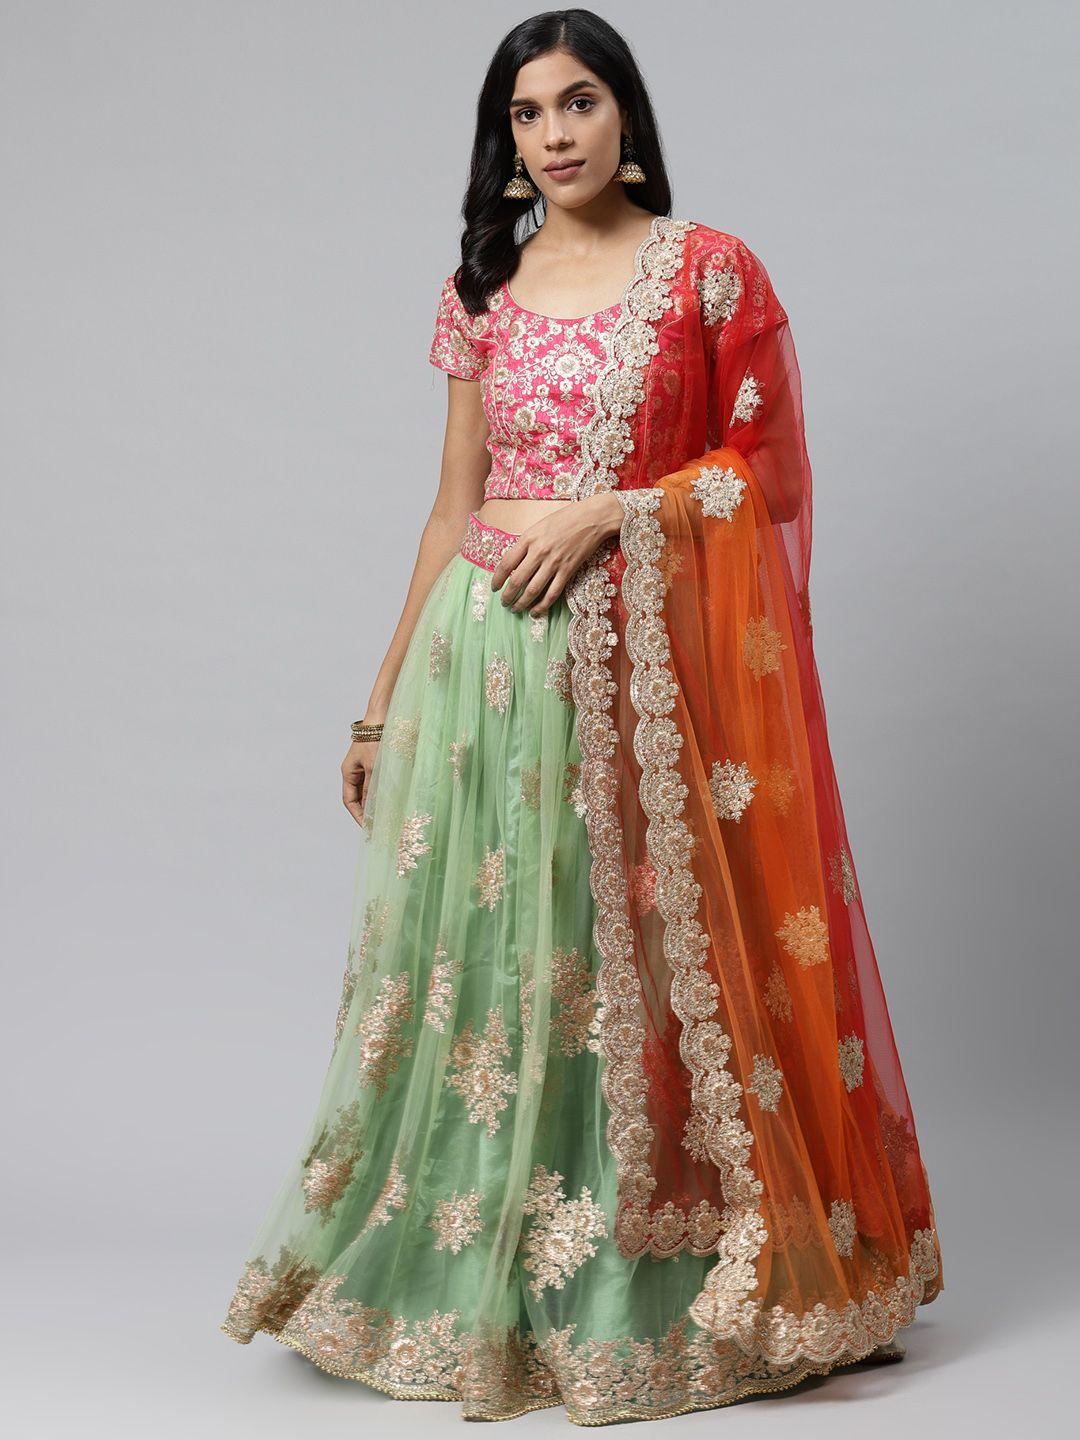 Readiprint Fashions Green & Pink Embroidered Semi-Stitched Lehenga & Unstitched Blouse with Dupatta